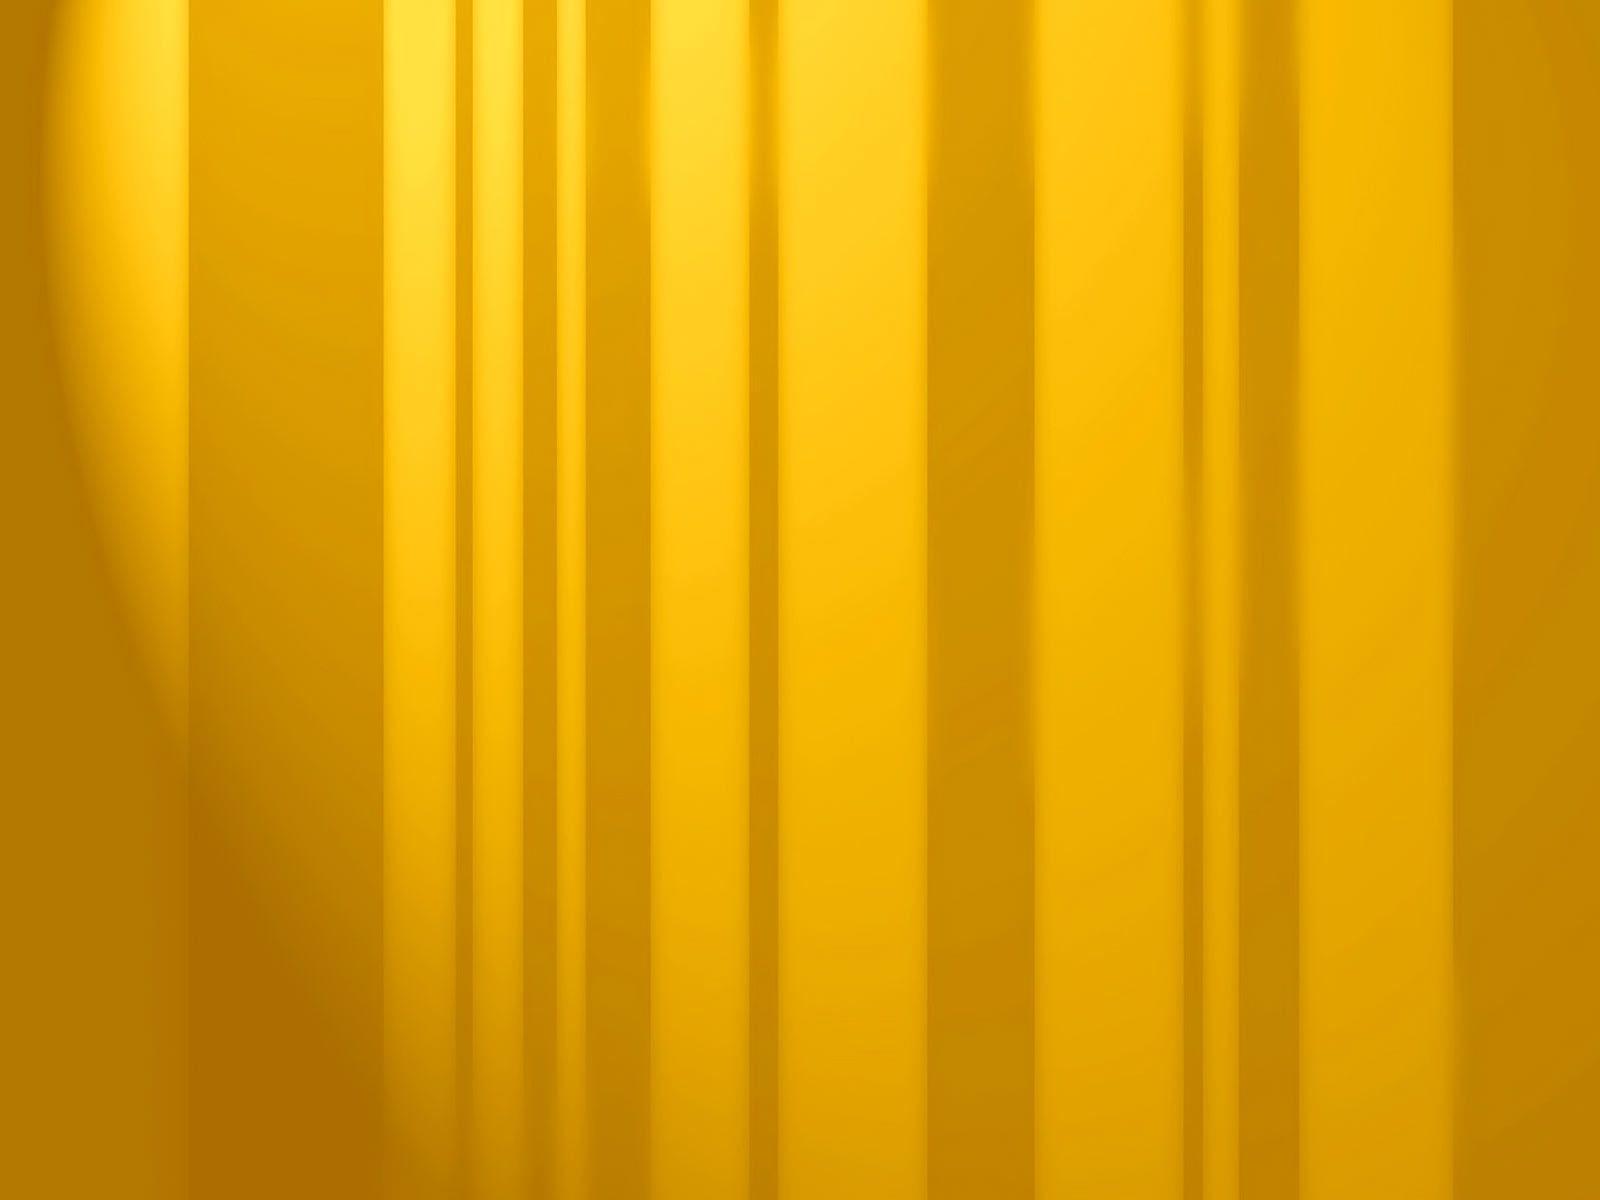 Desktop Wallpaper · Gallery · Computers · Yellow Themes. Free